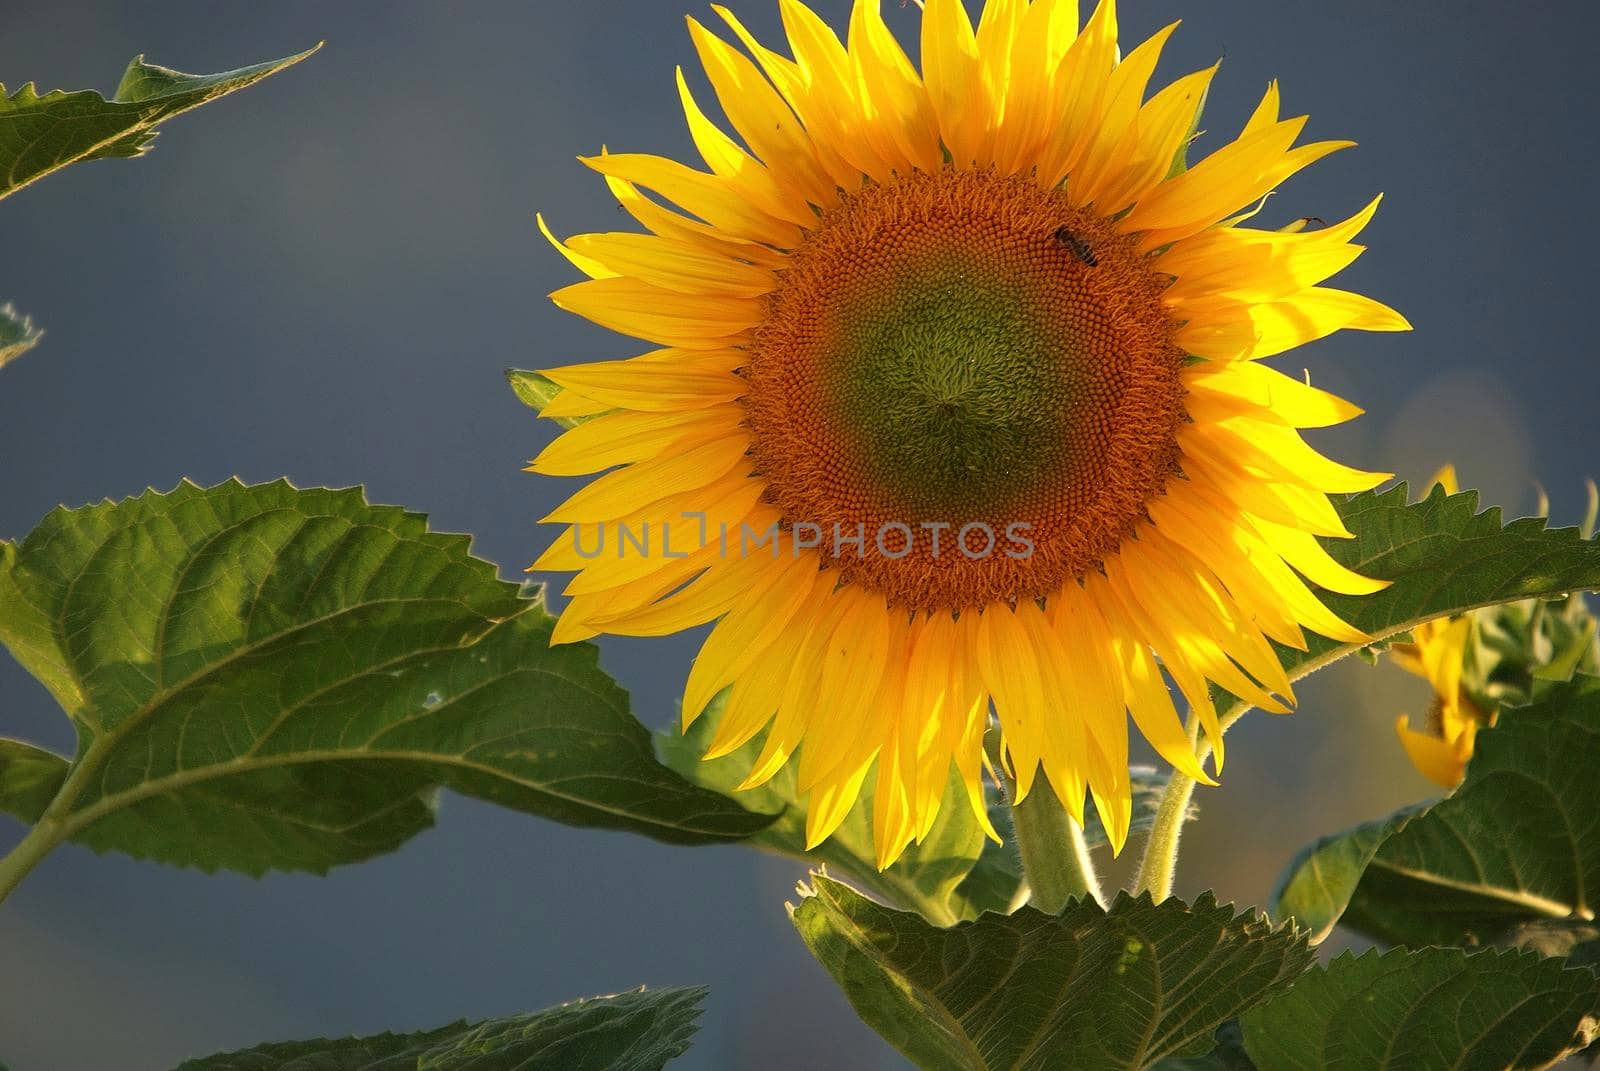 sunflower at sunny day   (NIKON D80; 6.7.2007; 1/160 at f/6.3; ISO 200; white balance: Auto; focal length: 370 mm)